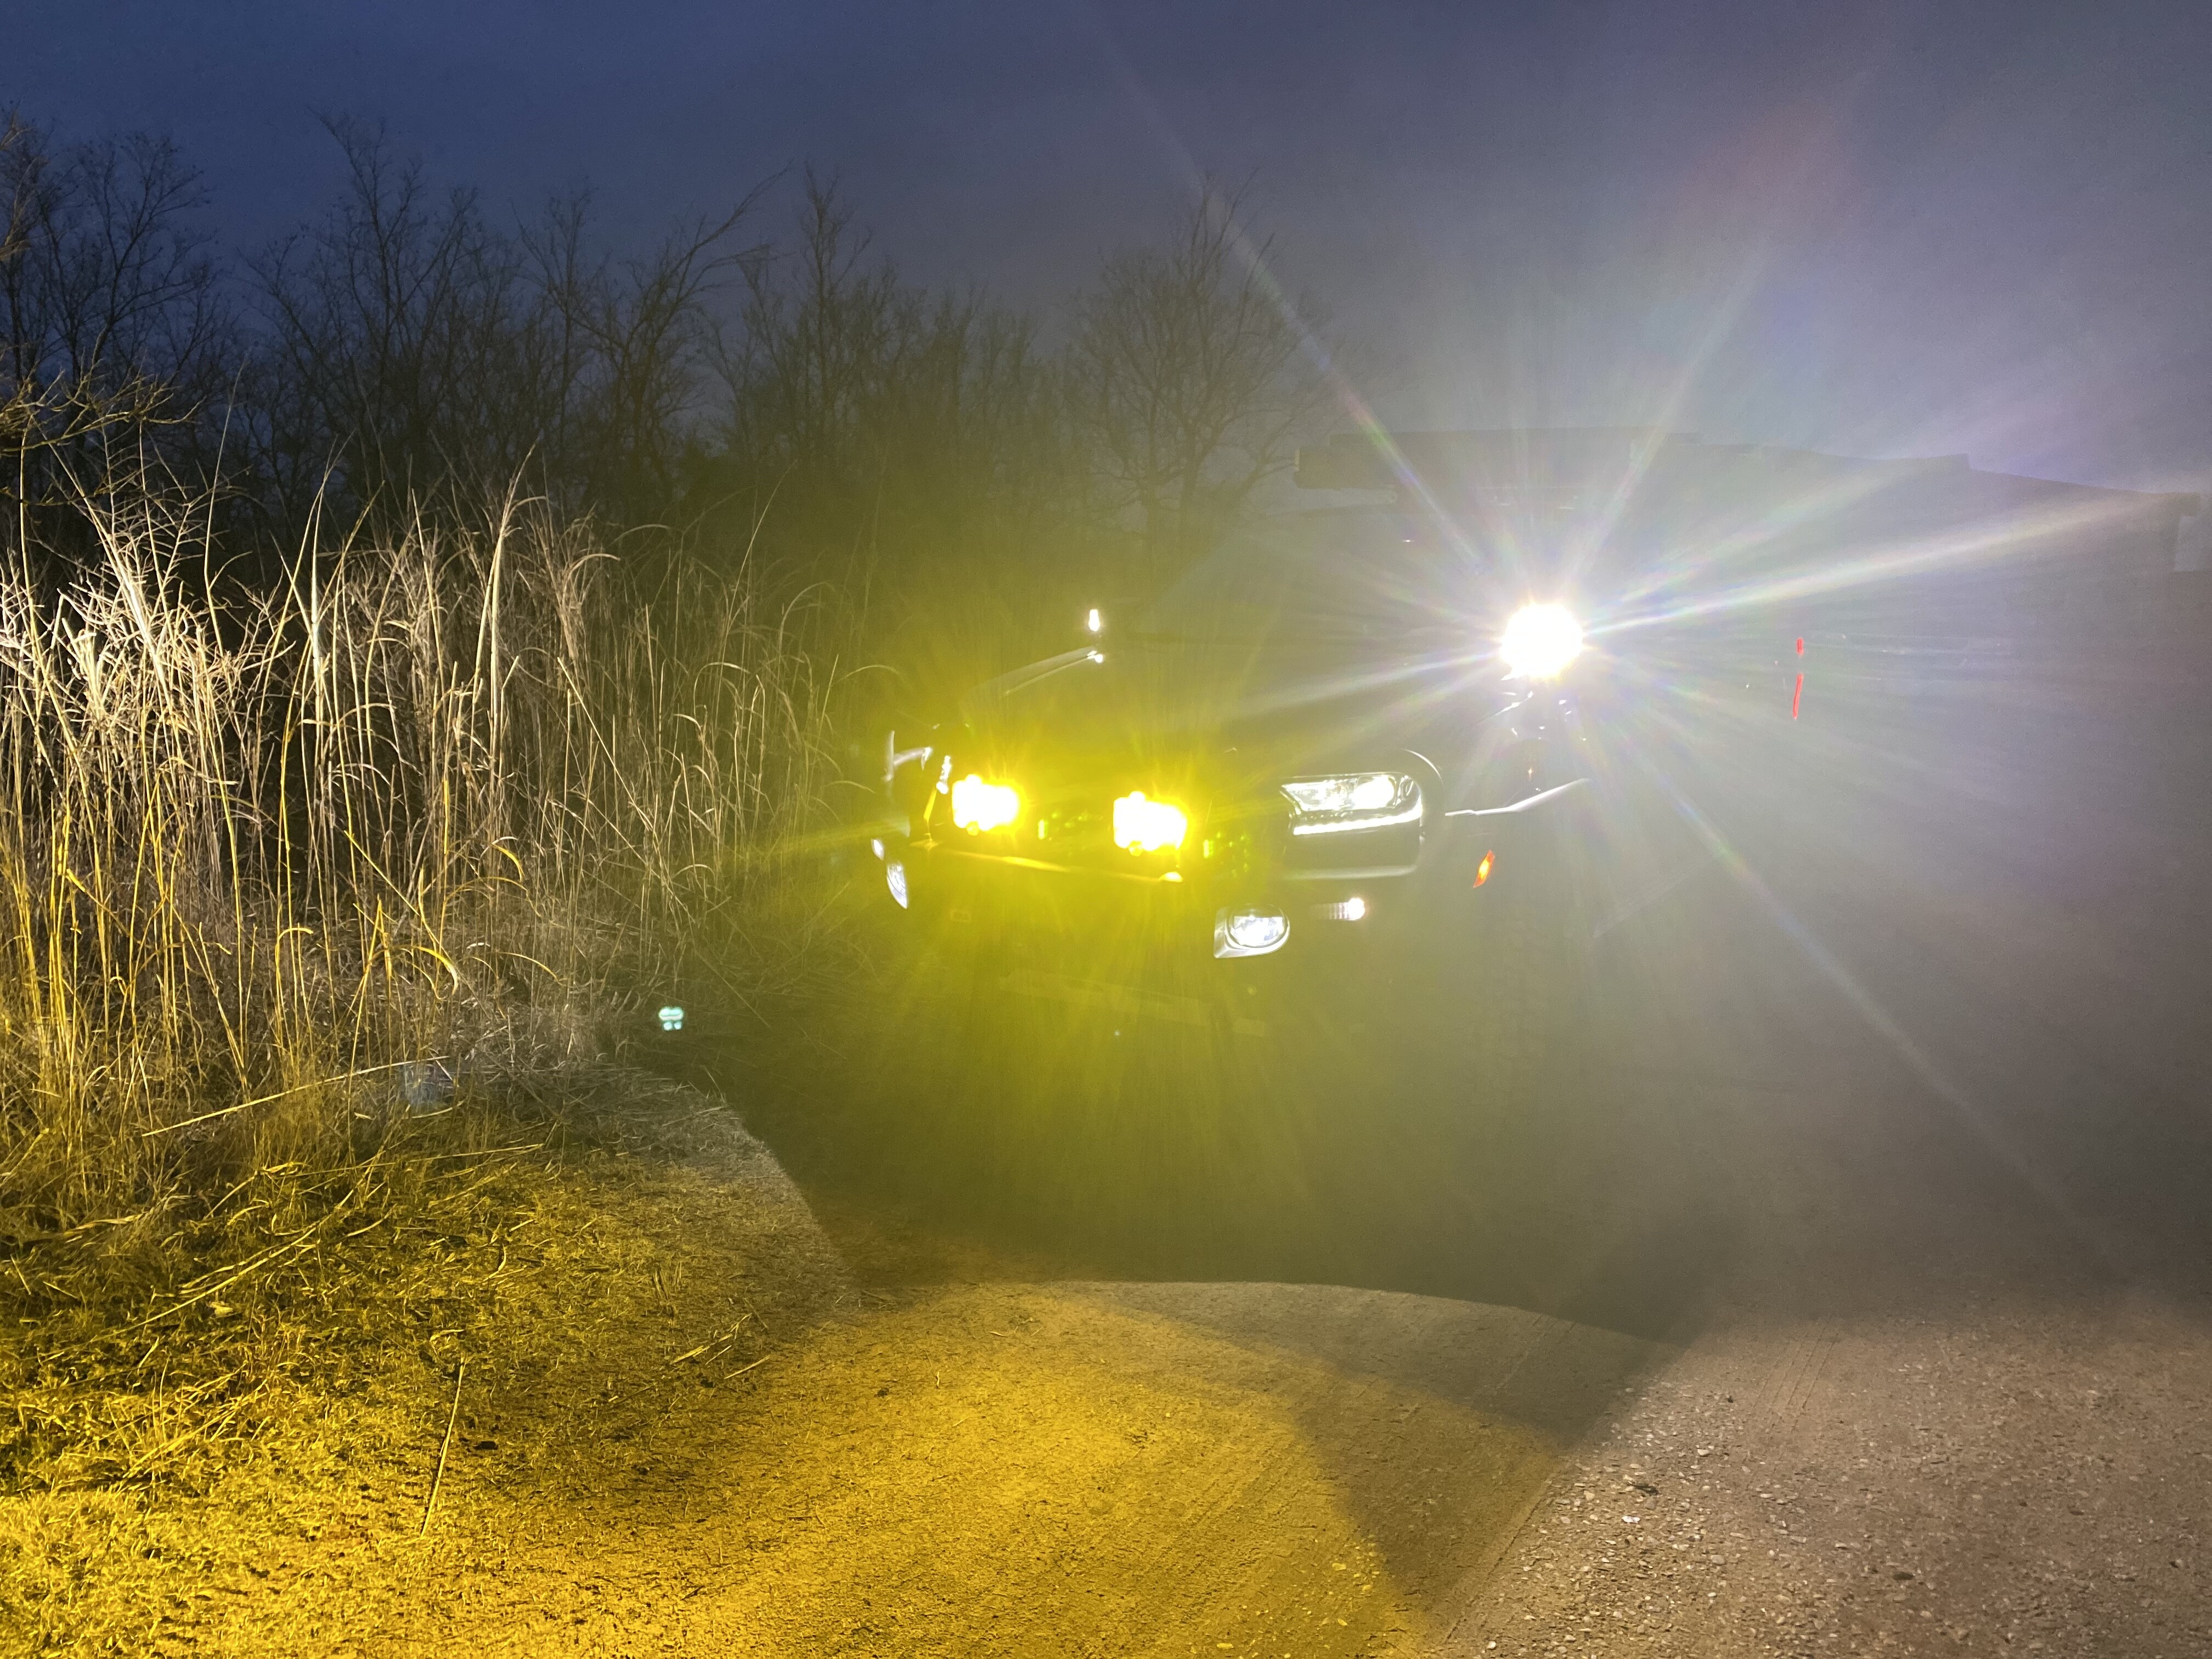 Replacemt led license plate lights (too bright?)  2019+ Ford Ranger and  Raptor Forum (5th Generation) 